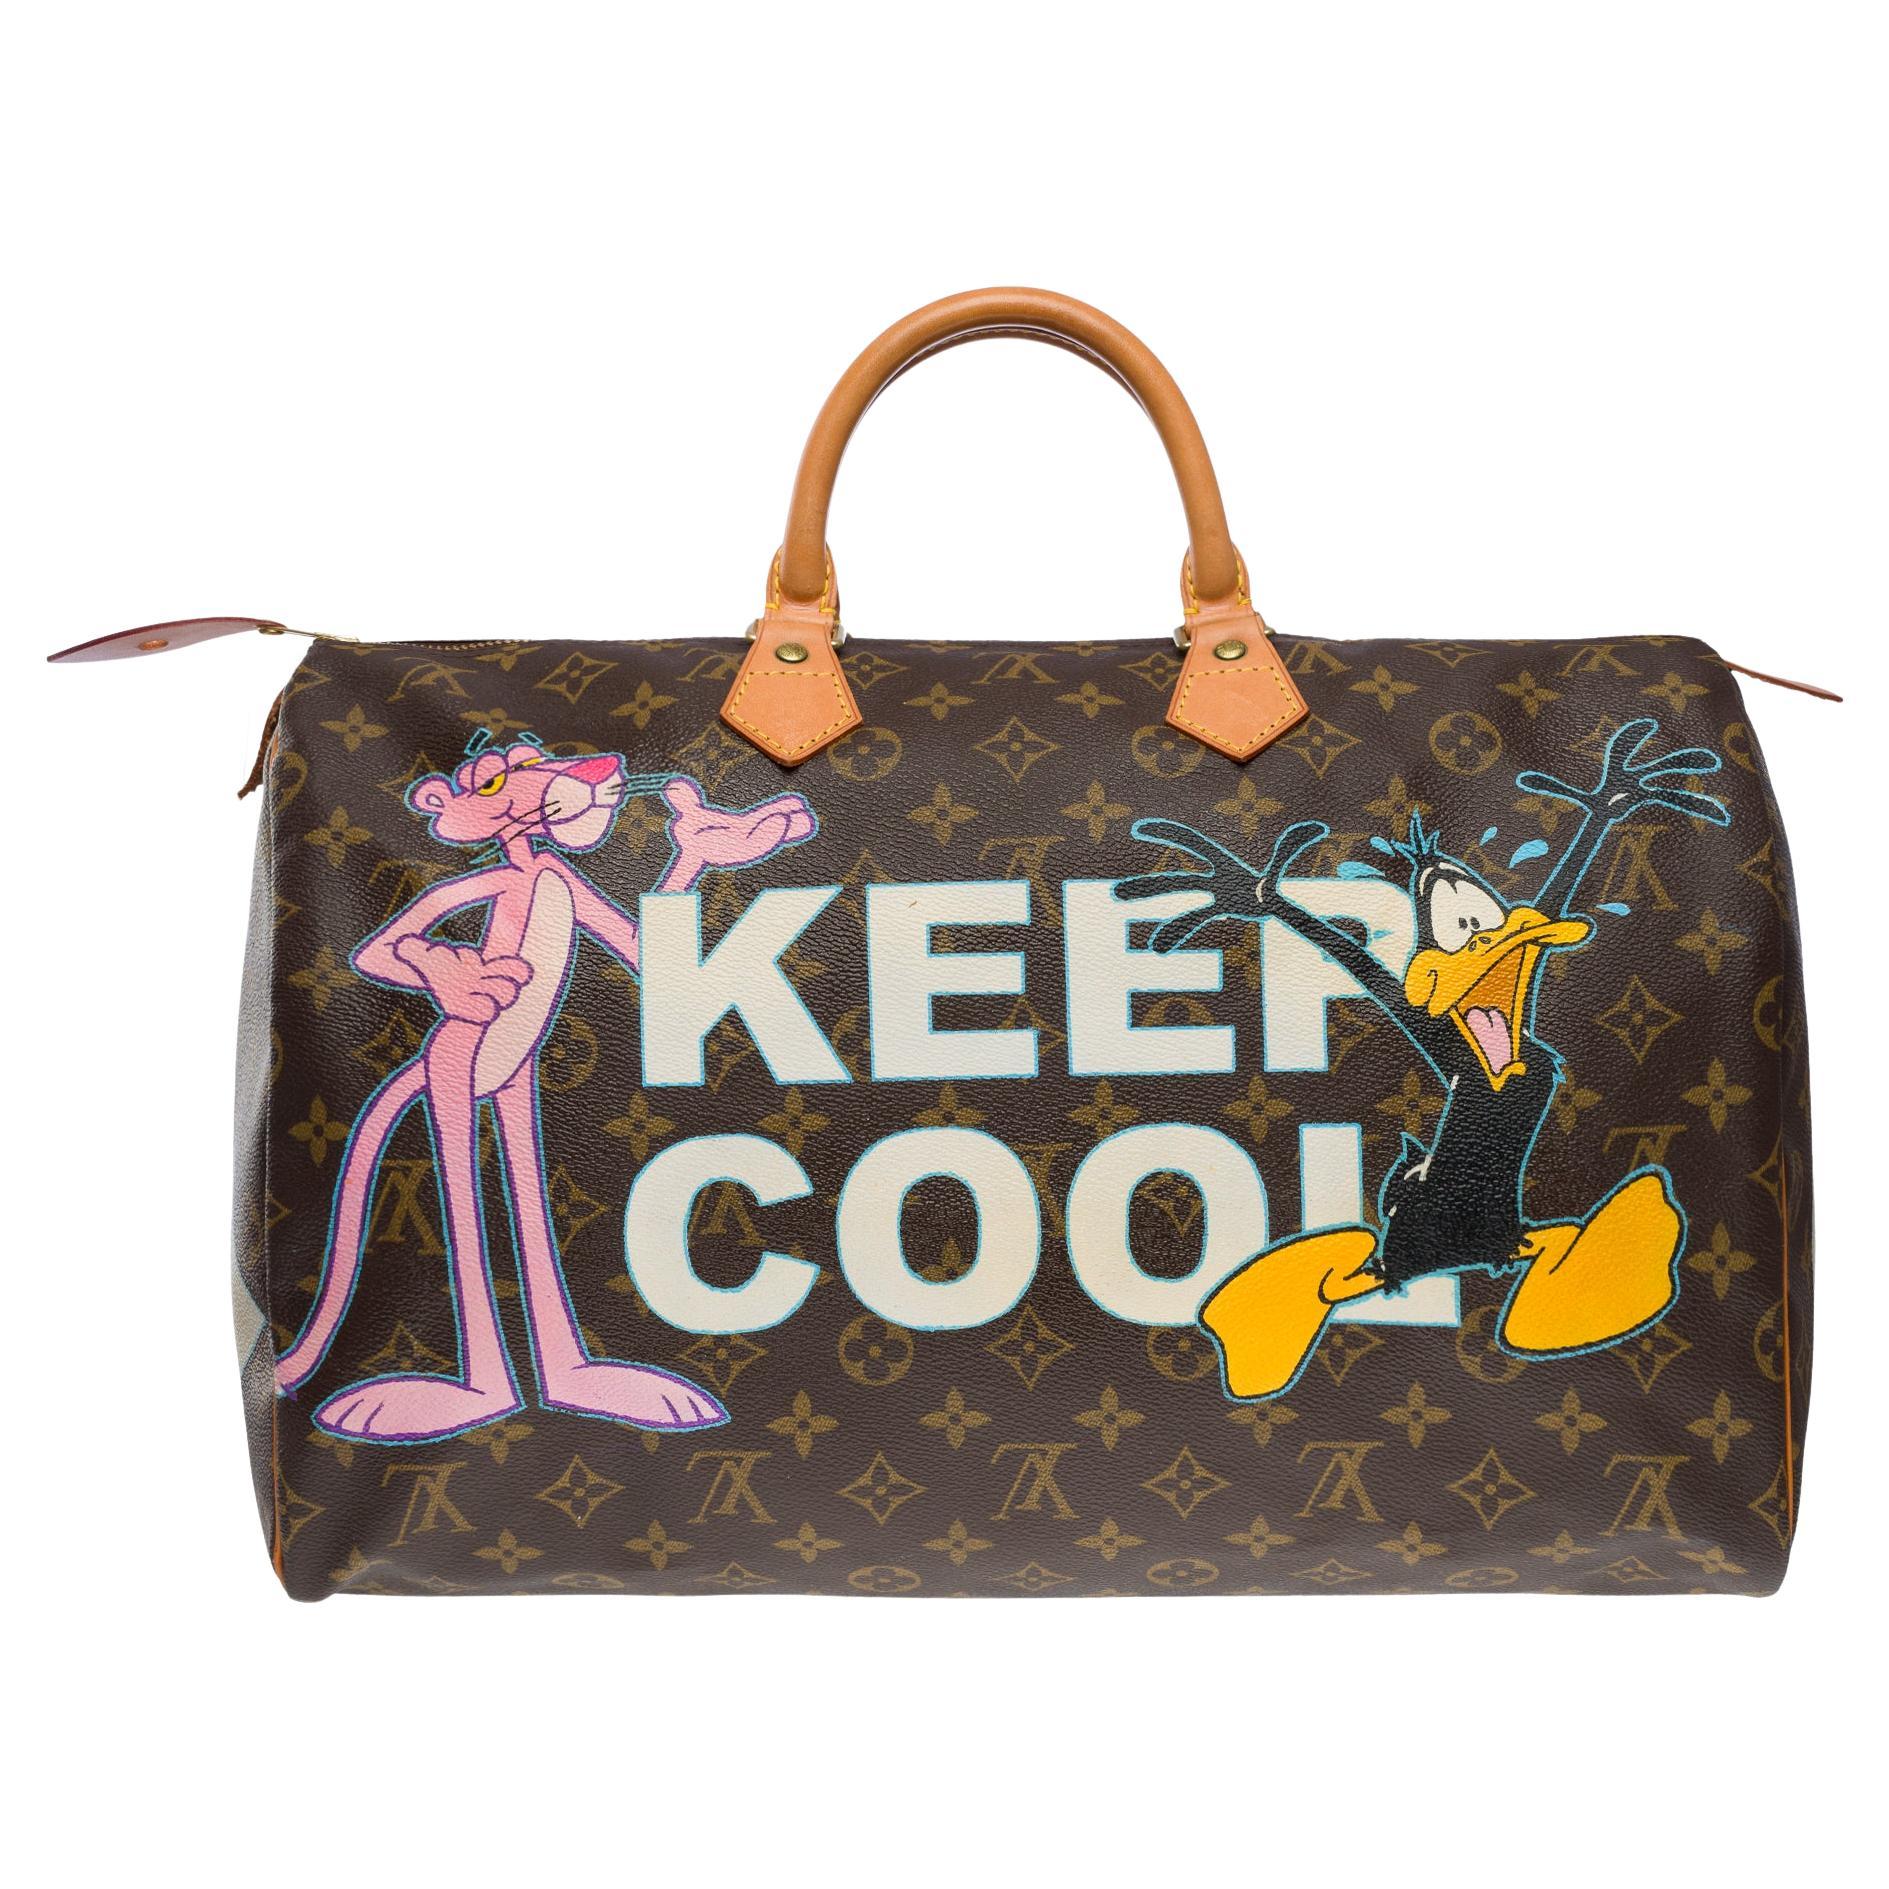 Speedy 35 My LV Heritage Monogram - Bags - Personalization Leather